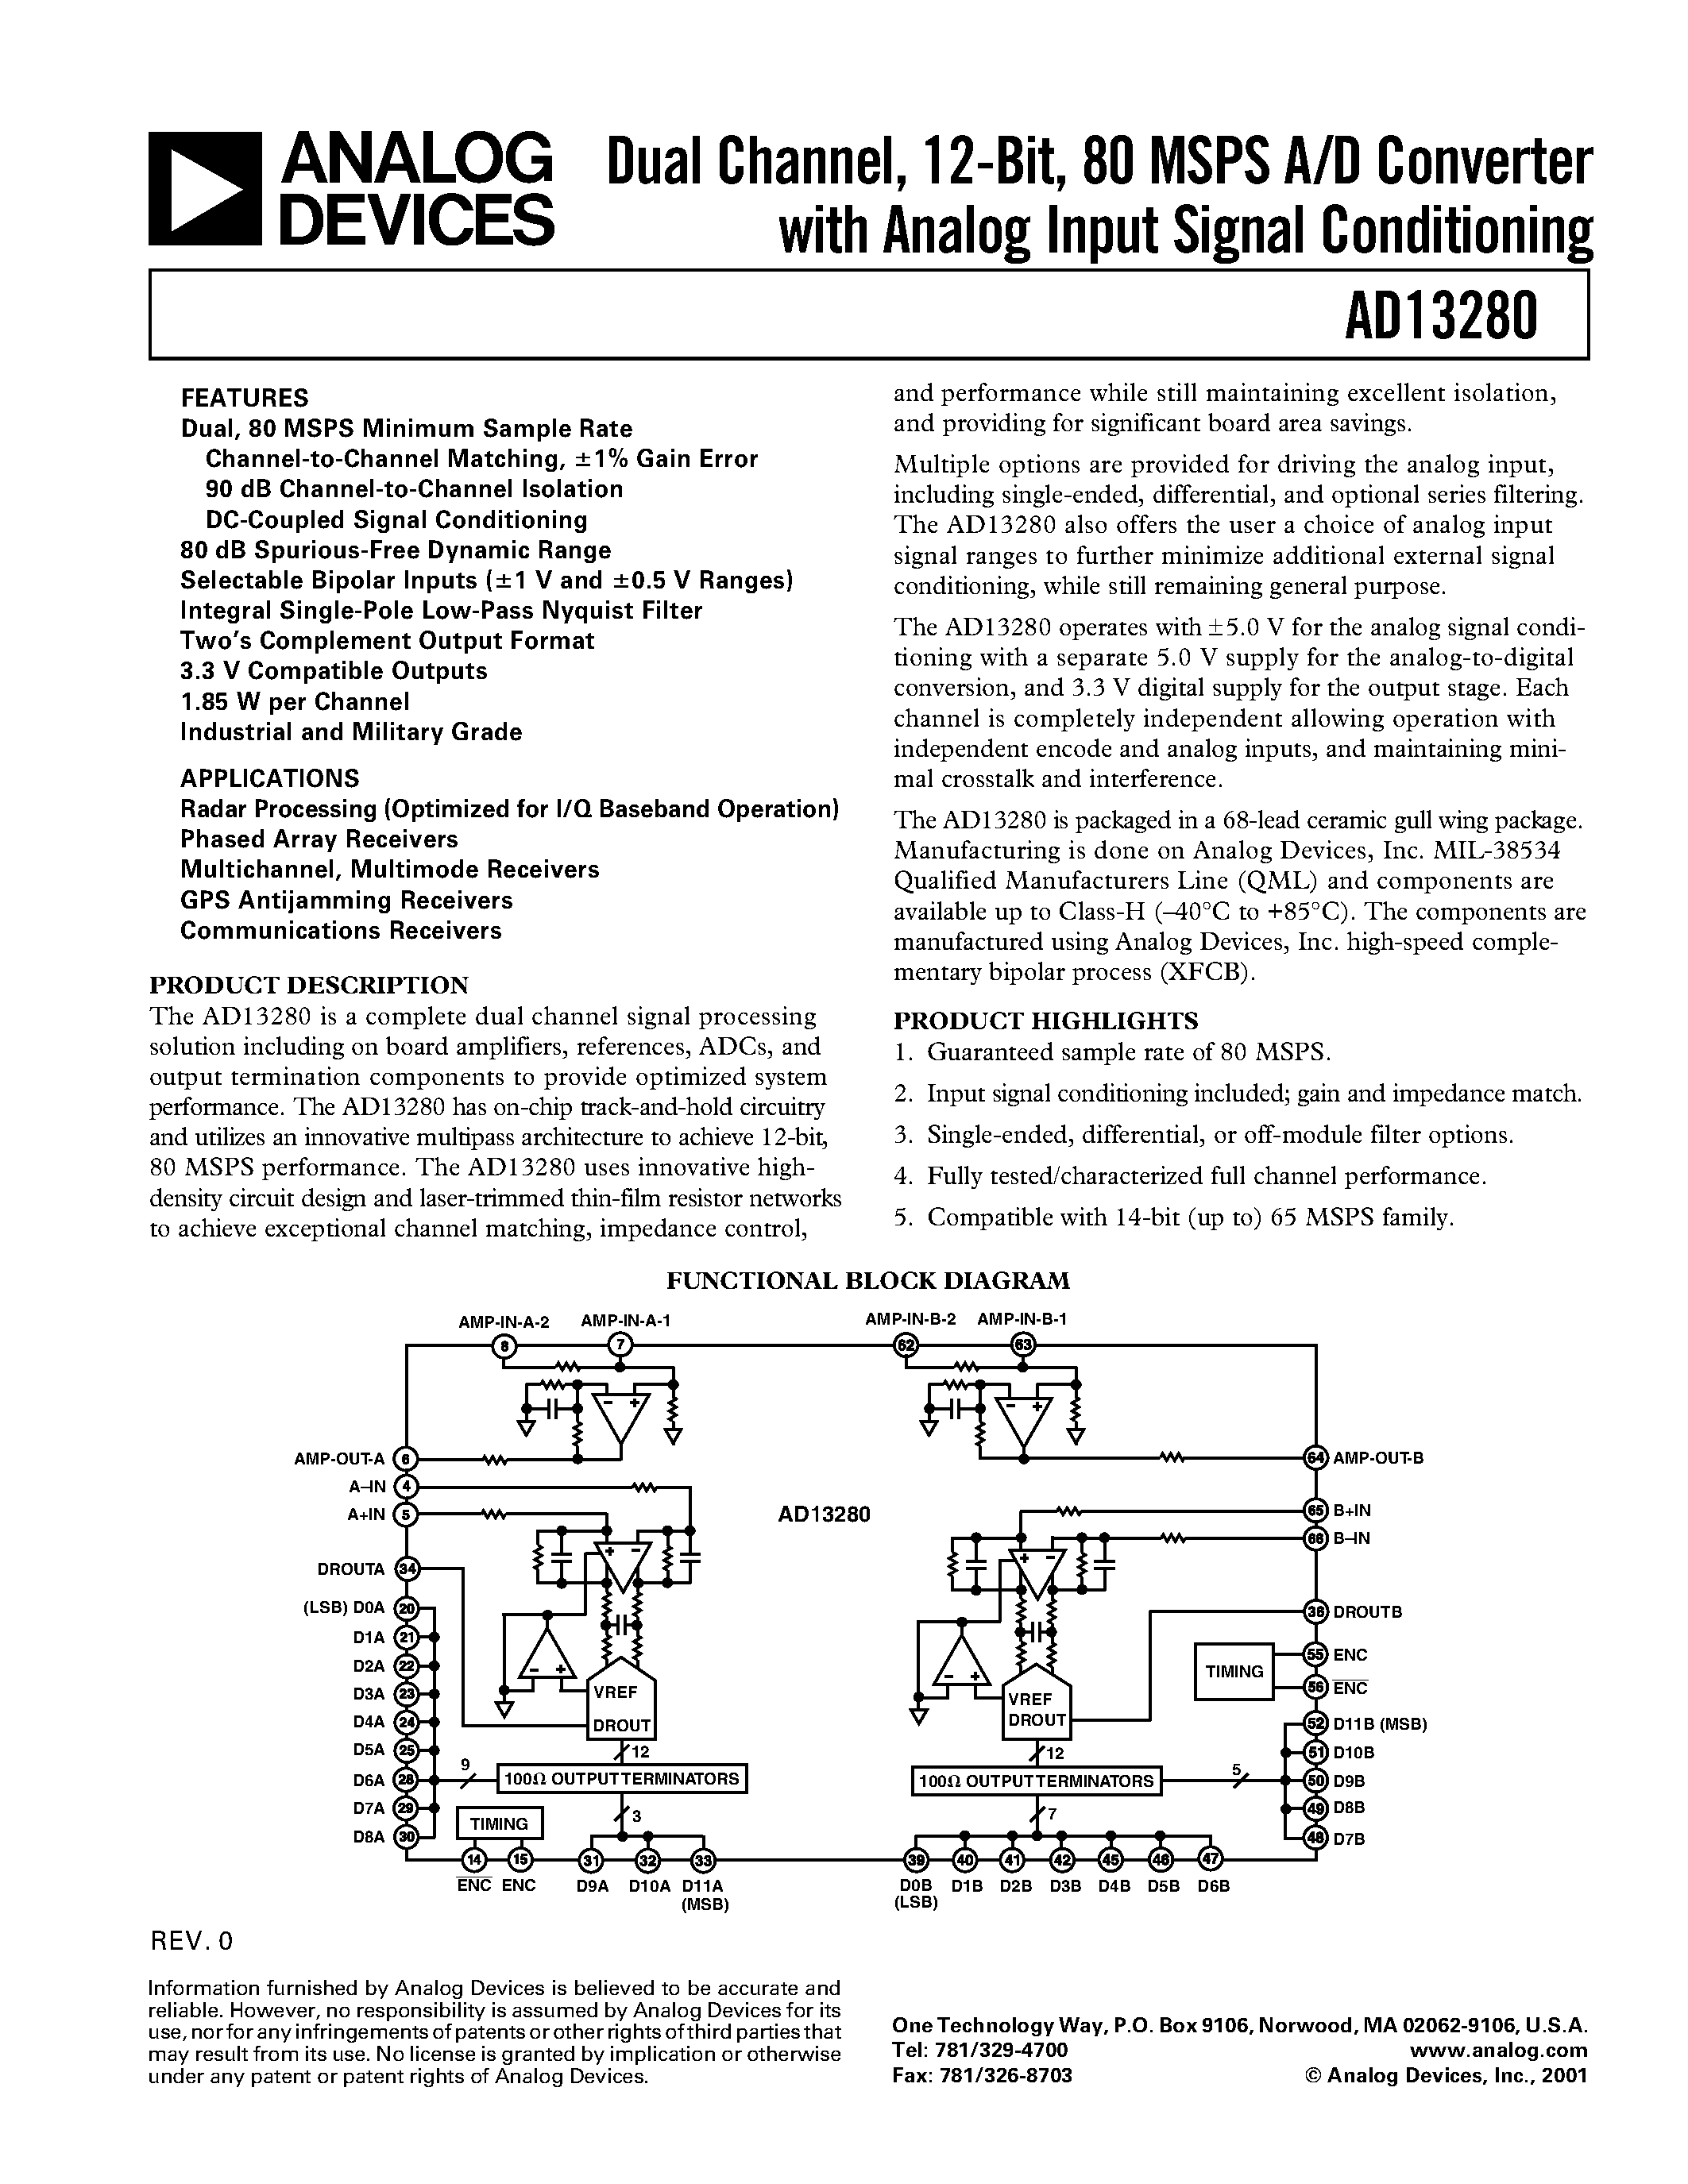 Datasheet AD13280BZ - Dual Channel/ 12-Bit/ 80 MSPS A/D Converter with Analog Input Signal Conditioning page 1